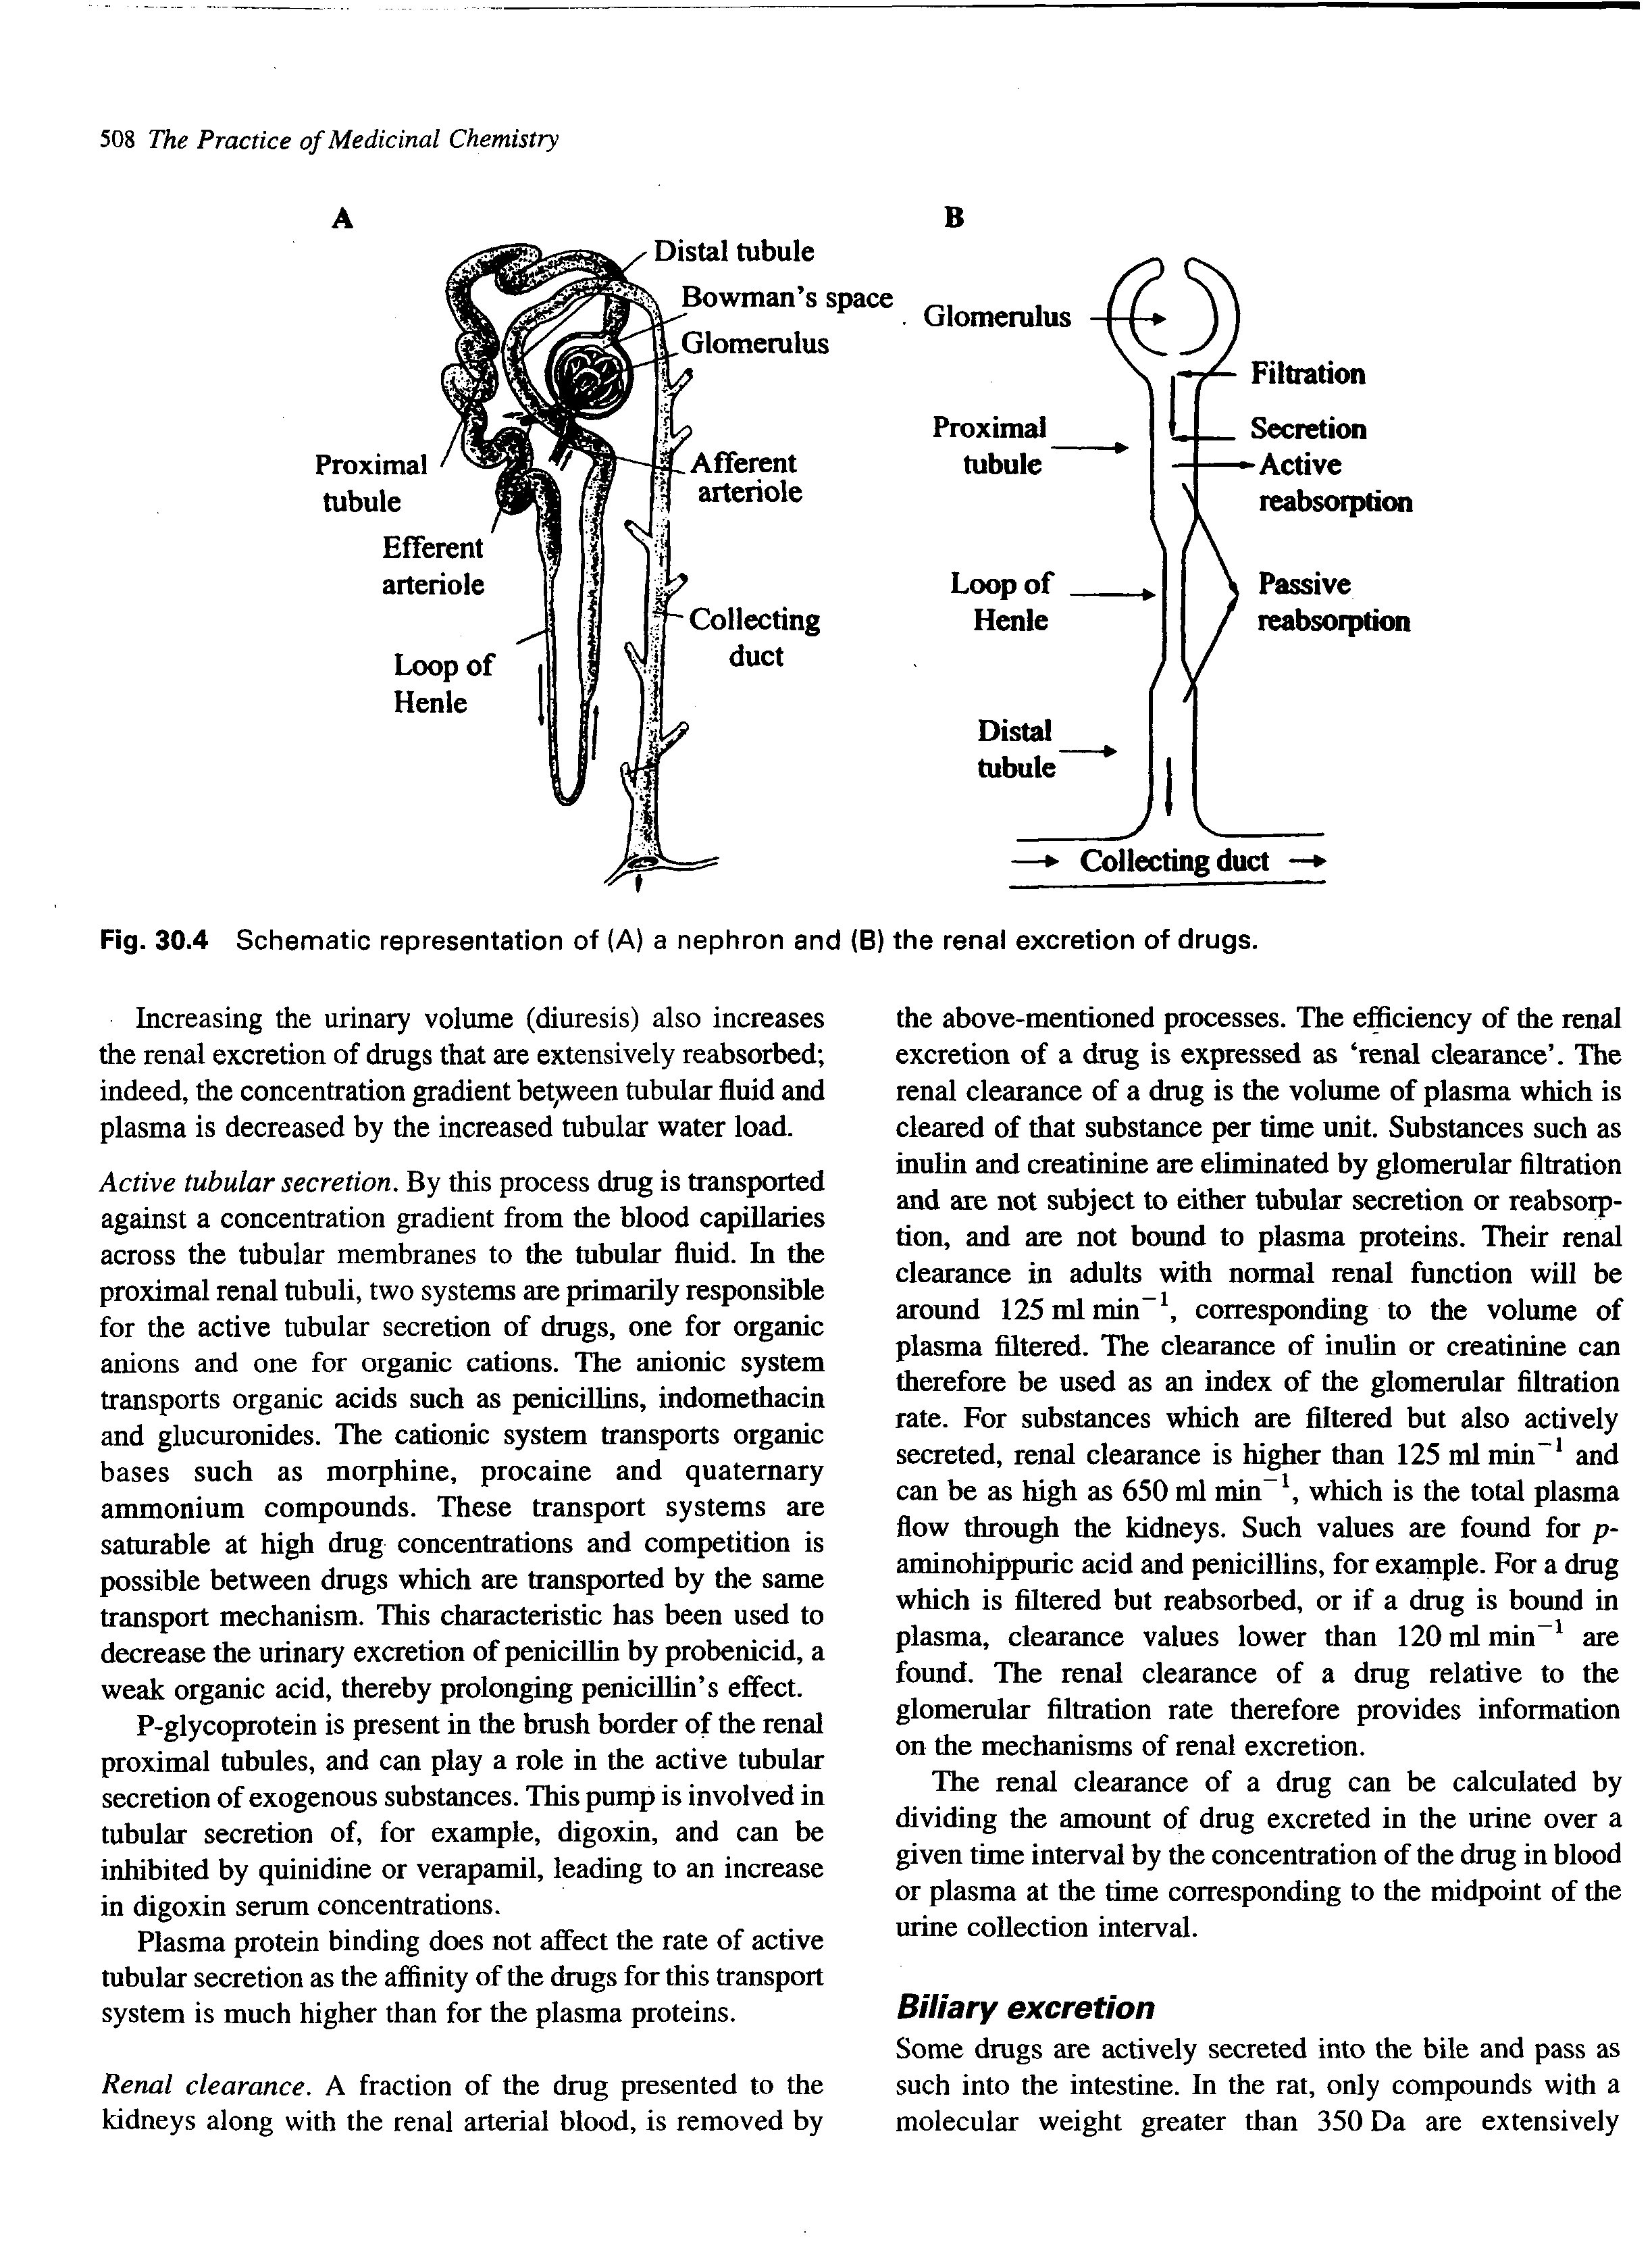 Fig. 30.4 Schematic representation of (A) a nephron and (B) the renal excretion of drugs.